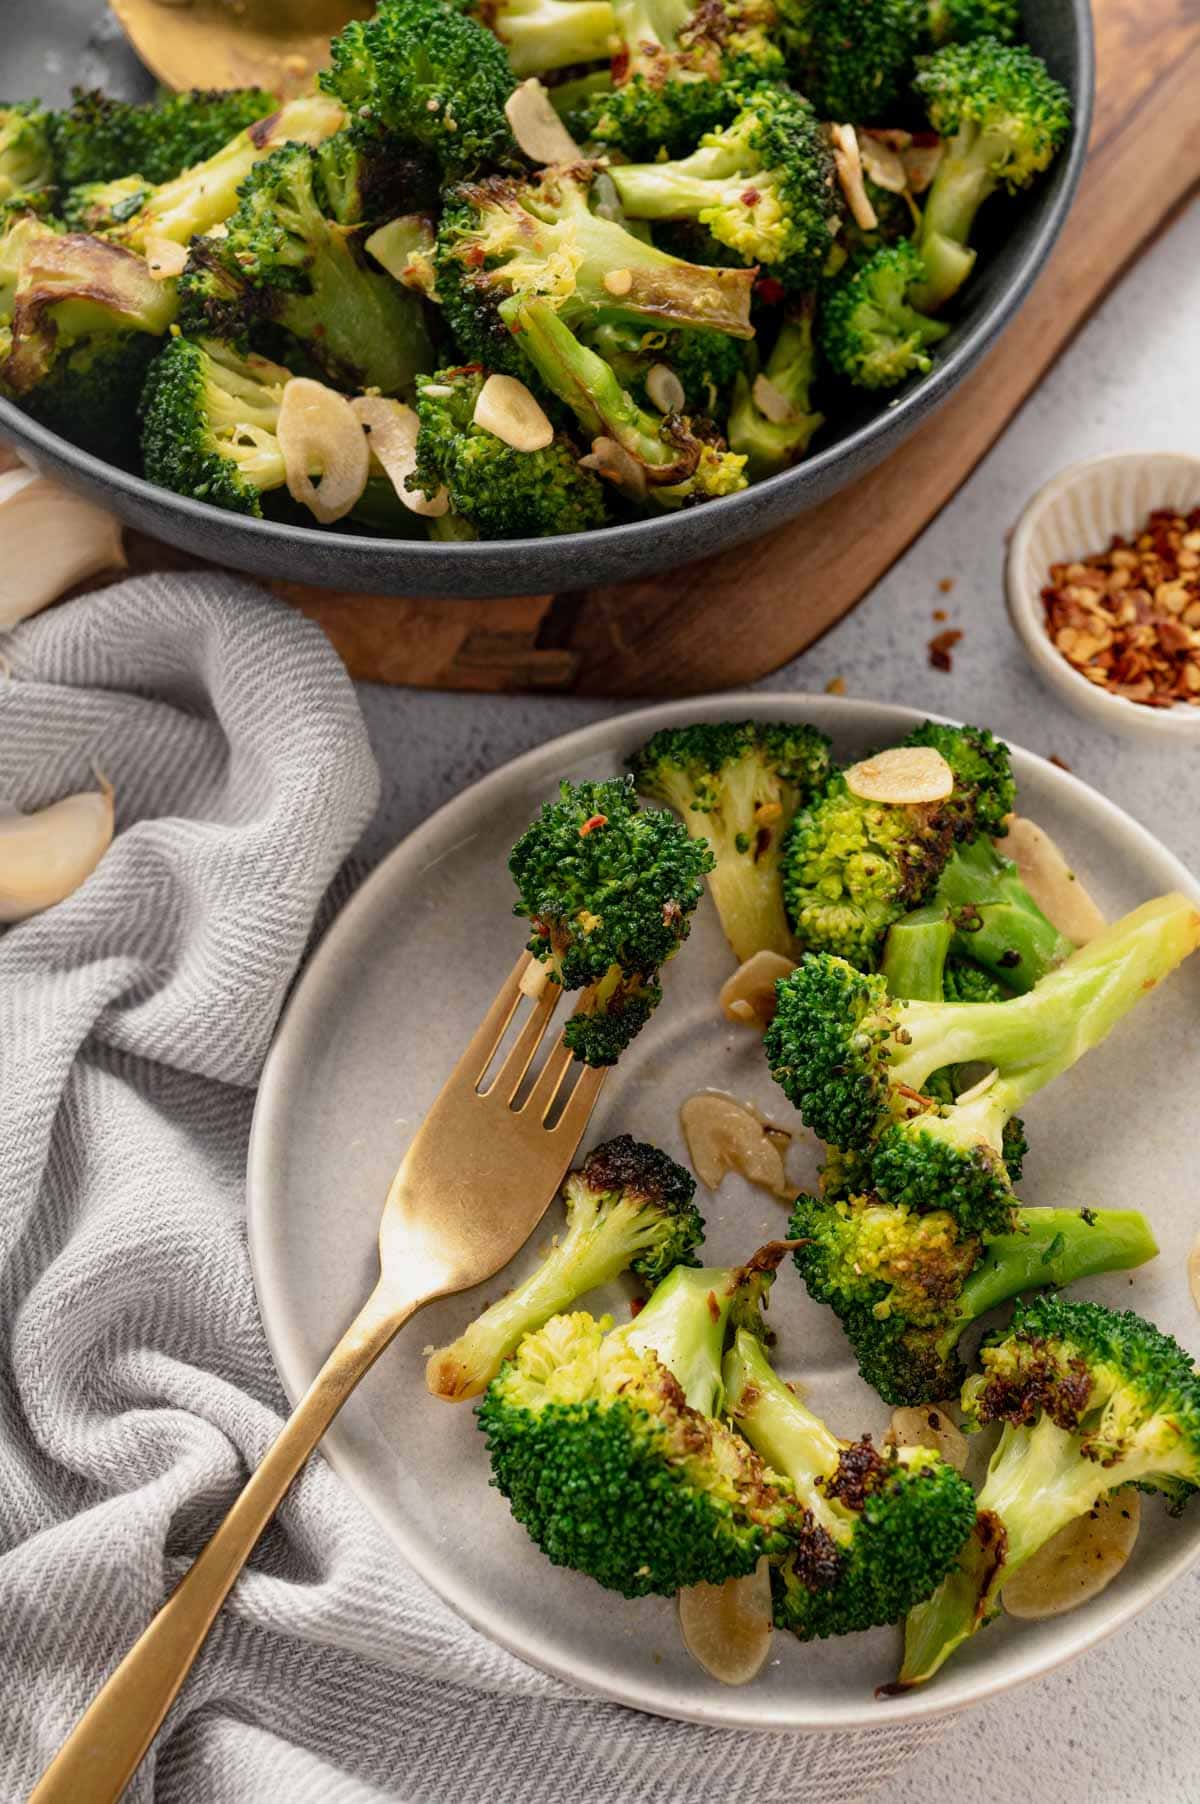 Sauteed broccoli with red pepper flakes and garlic on a plate with a fork.